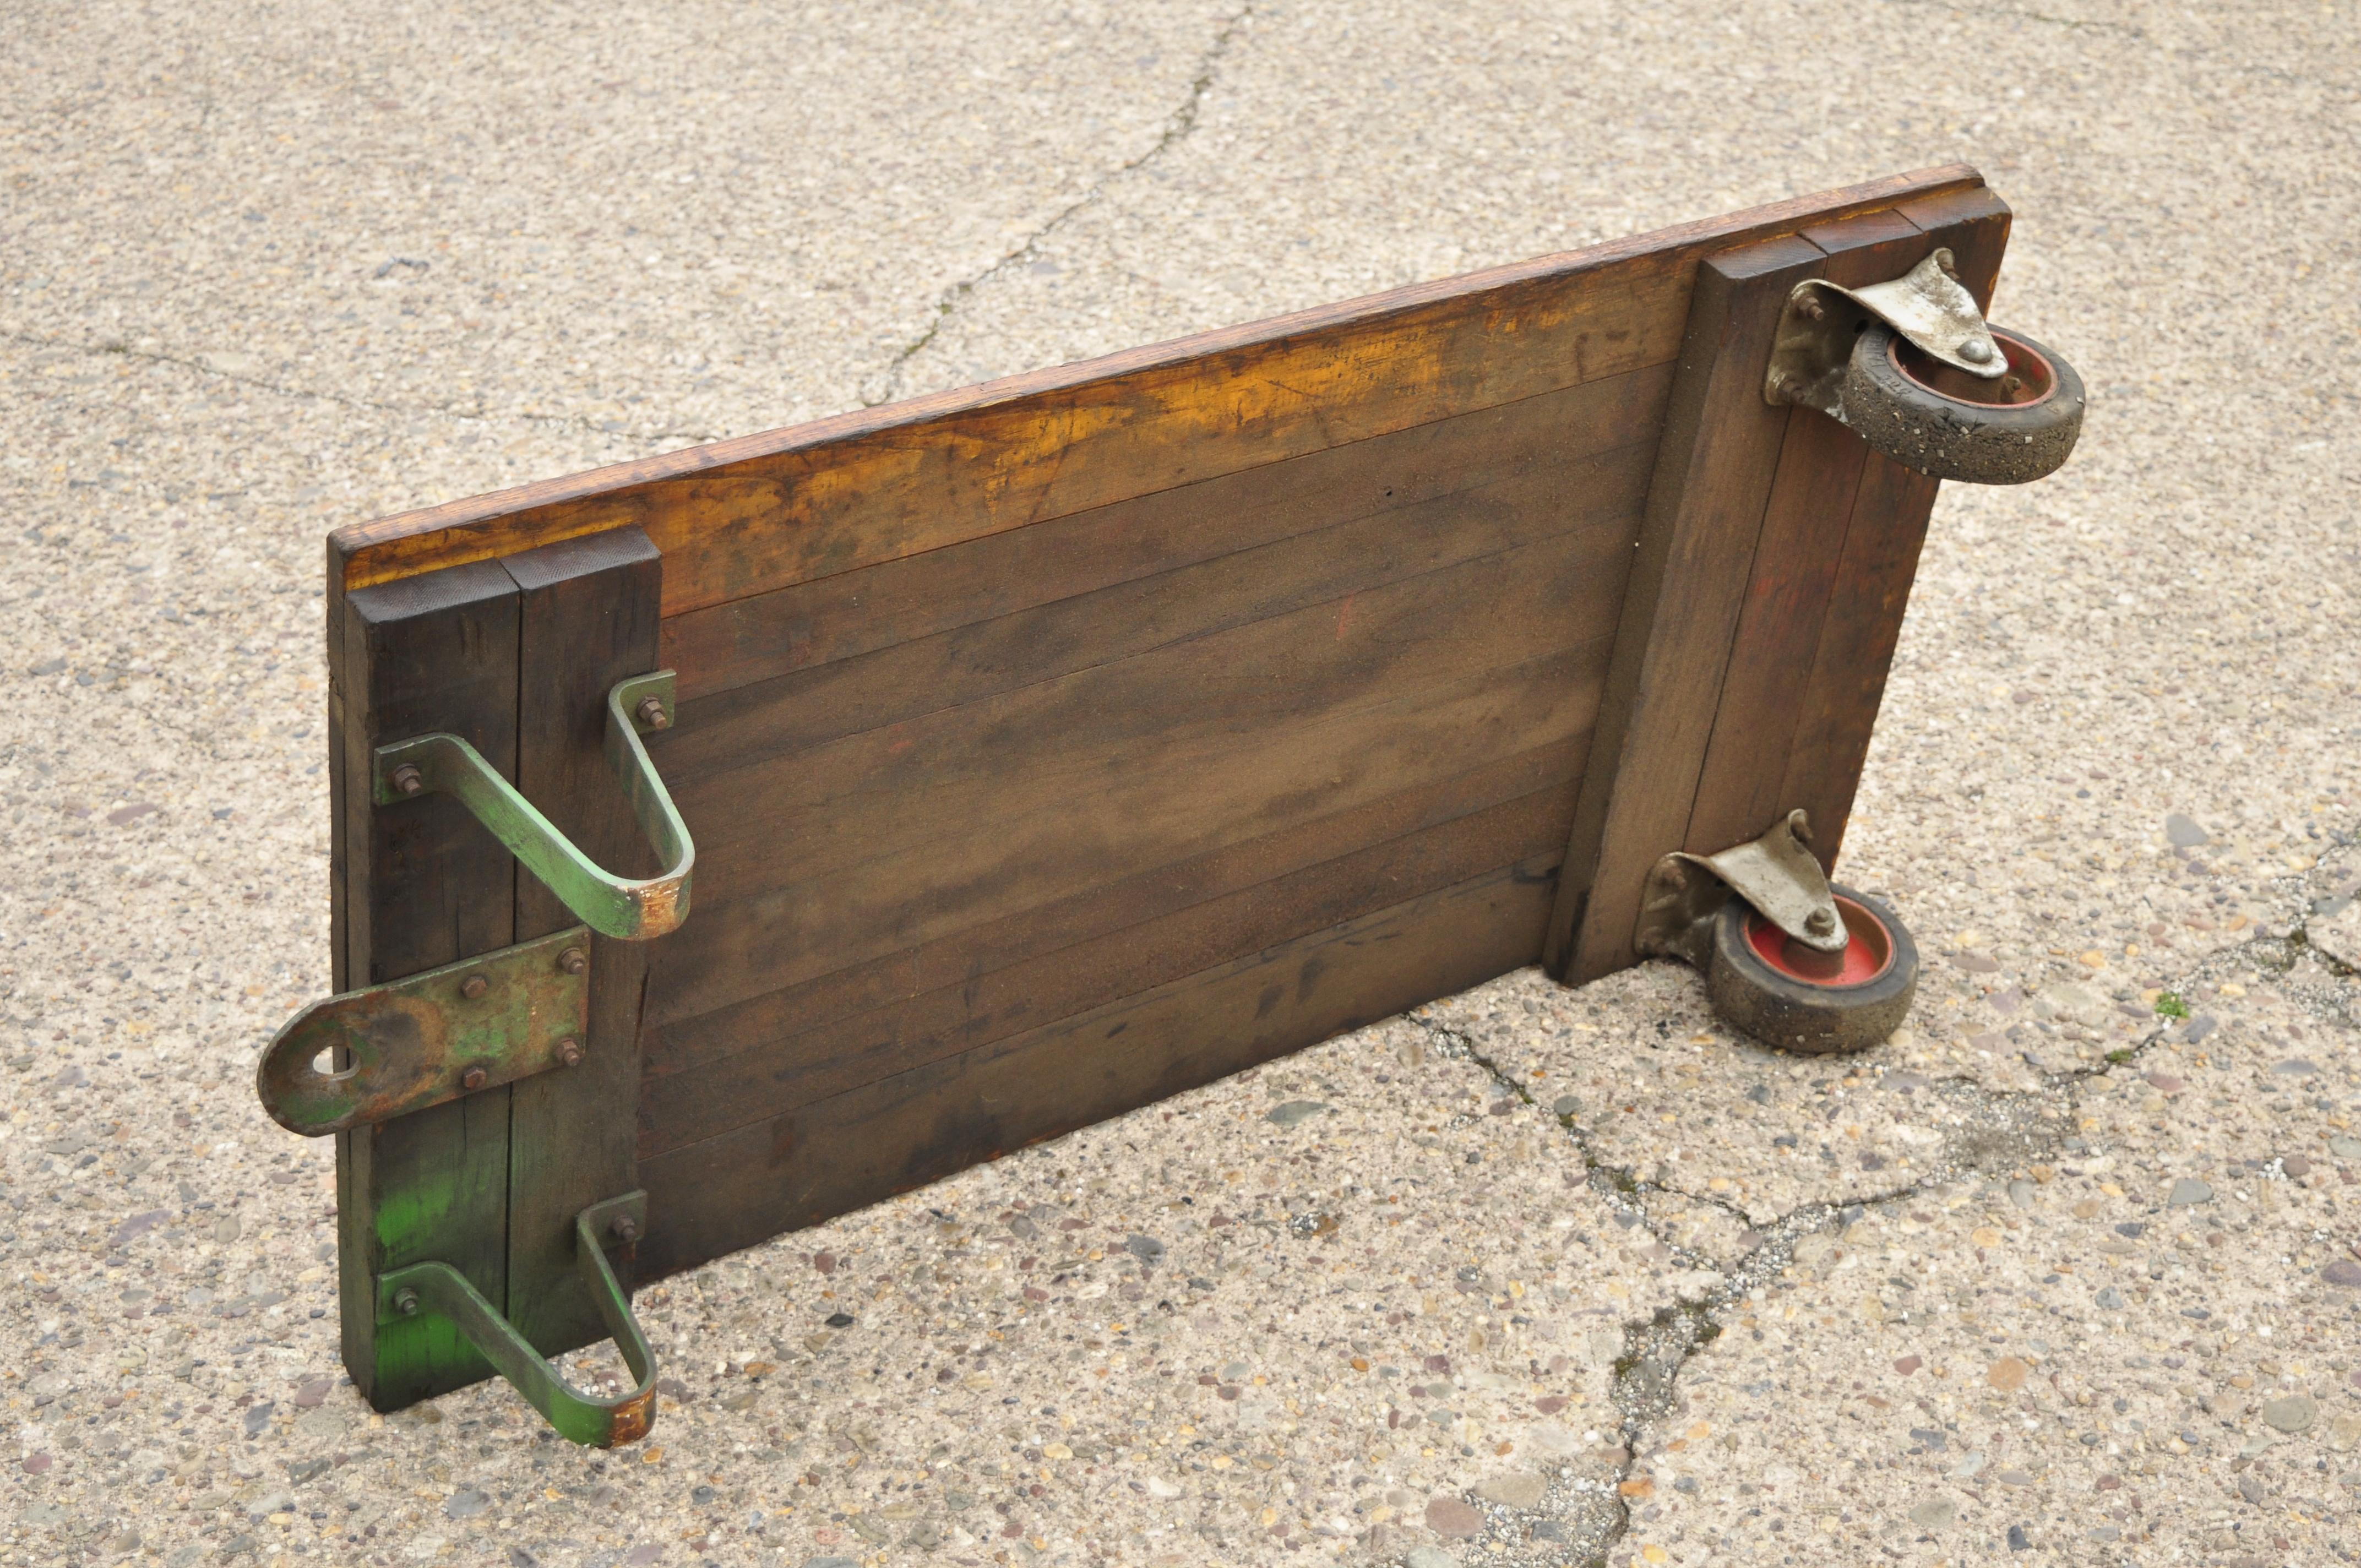 Vintage Fairbanks American Industrial Wood & Iron Factory Work Cart Coffee Table For Sale 2